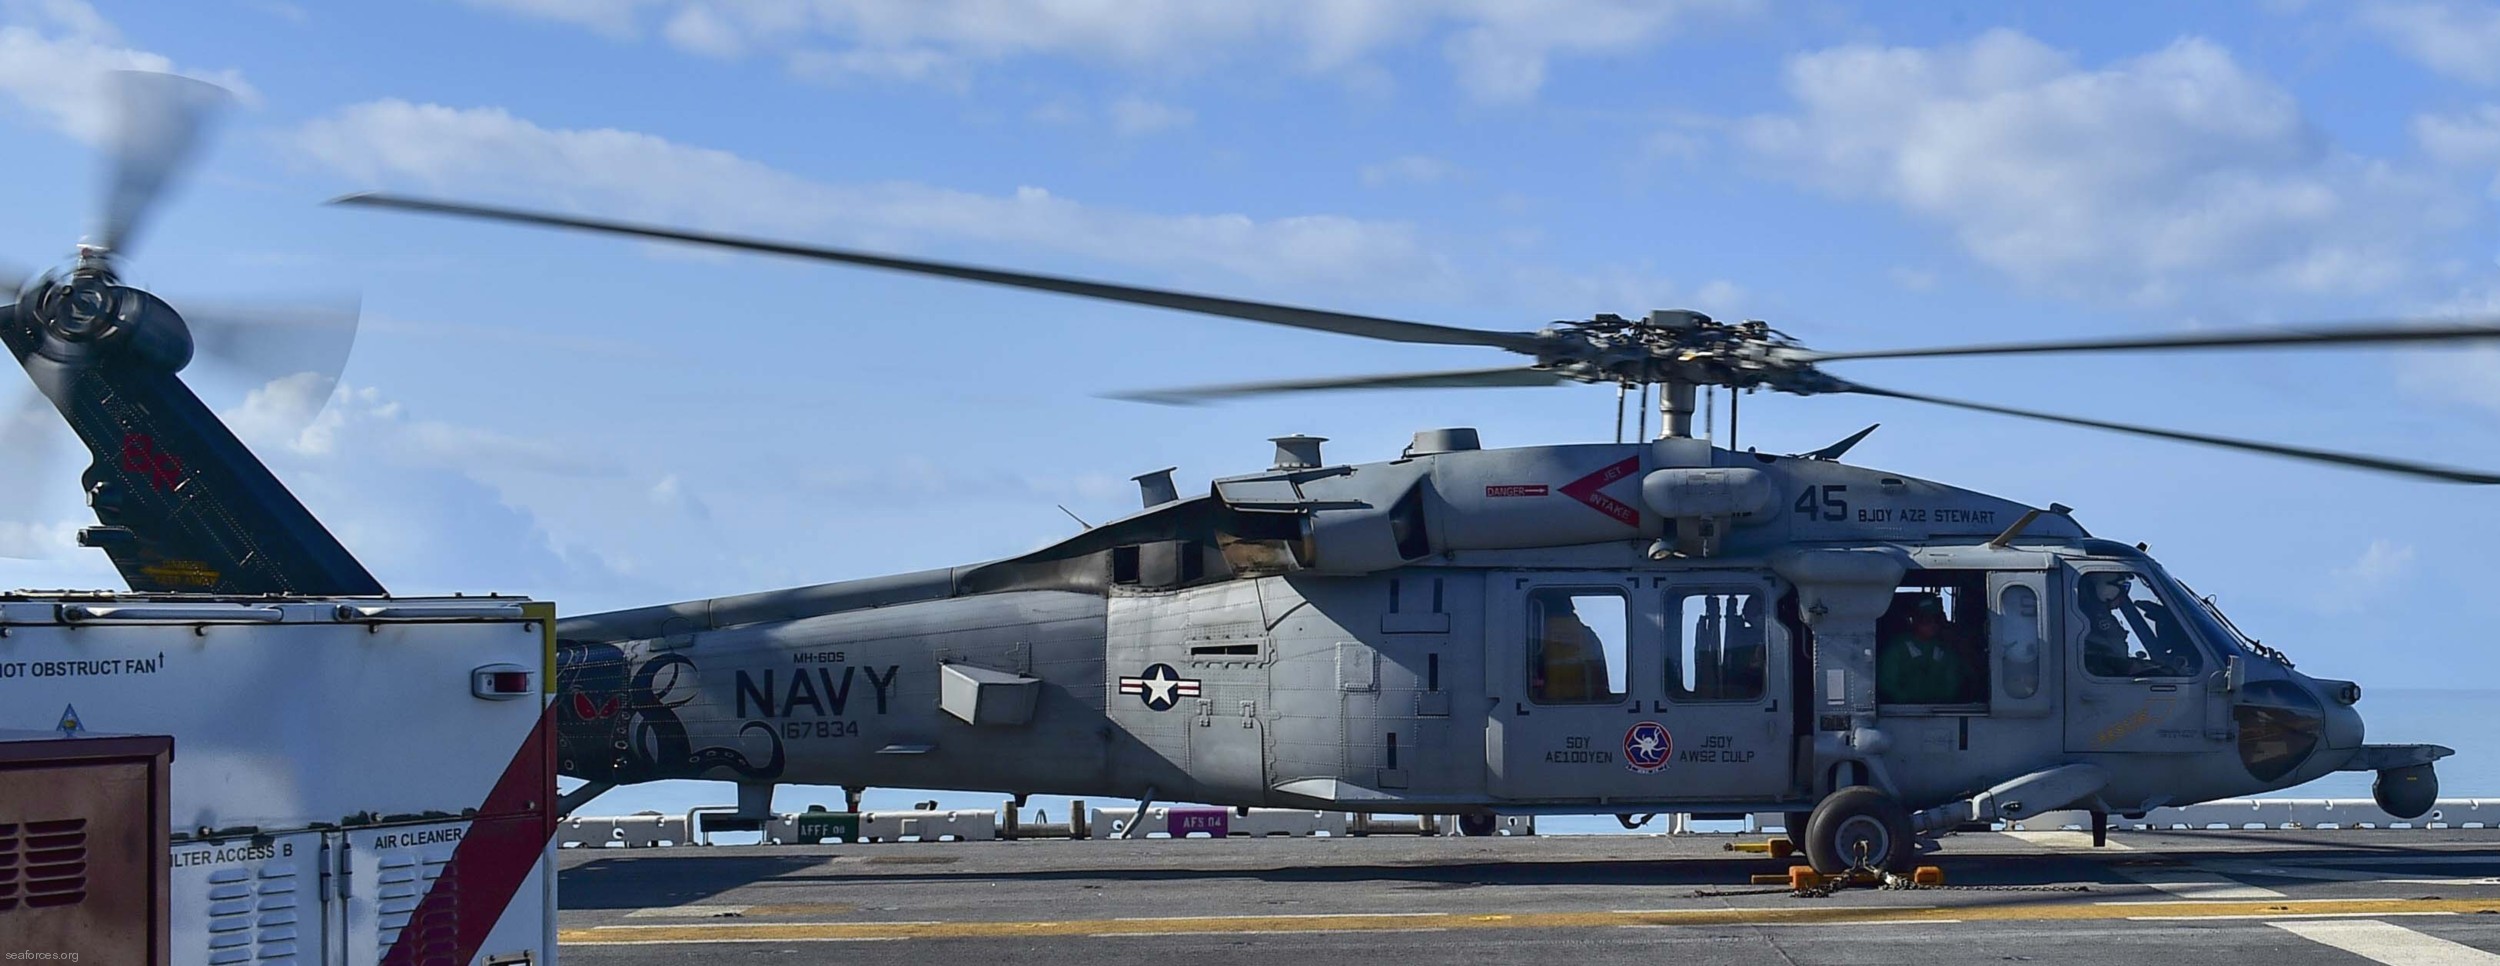 hsc-28 dragon whales helicopter sea combat squadron mh-60s seahawk us navy 52